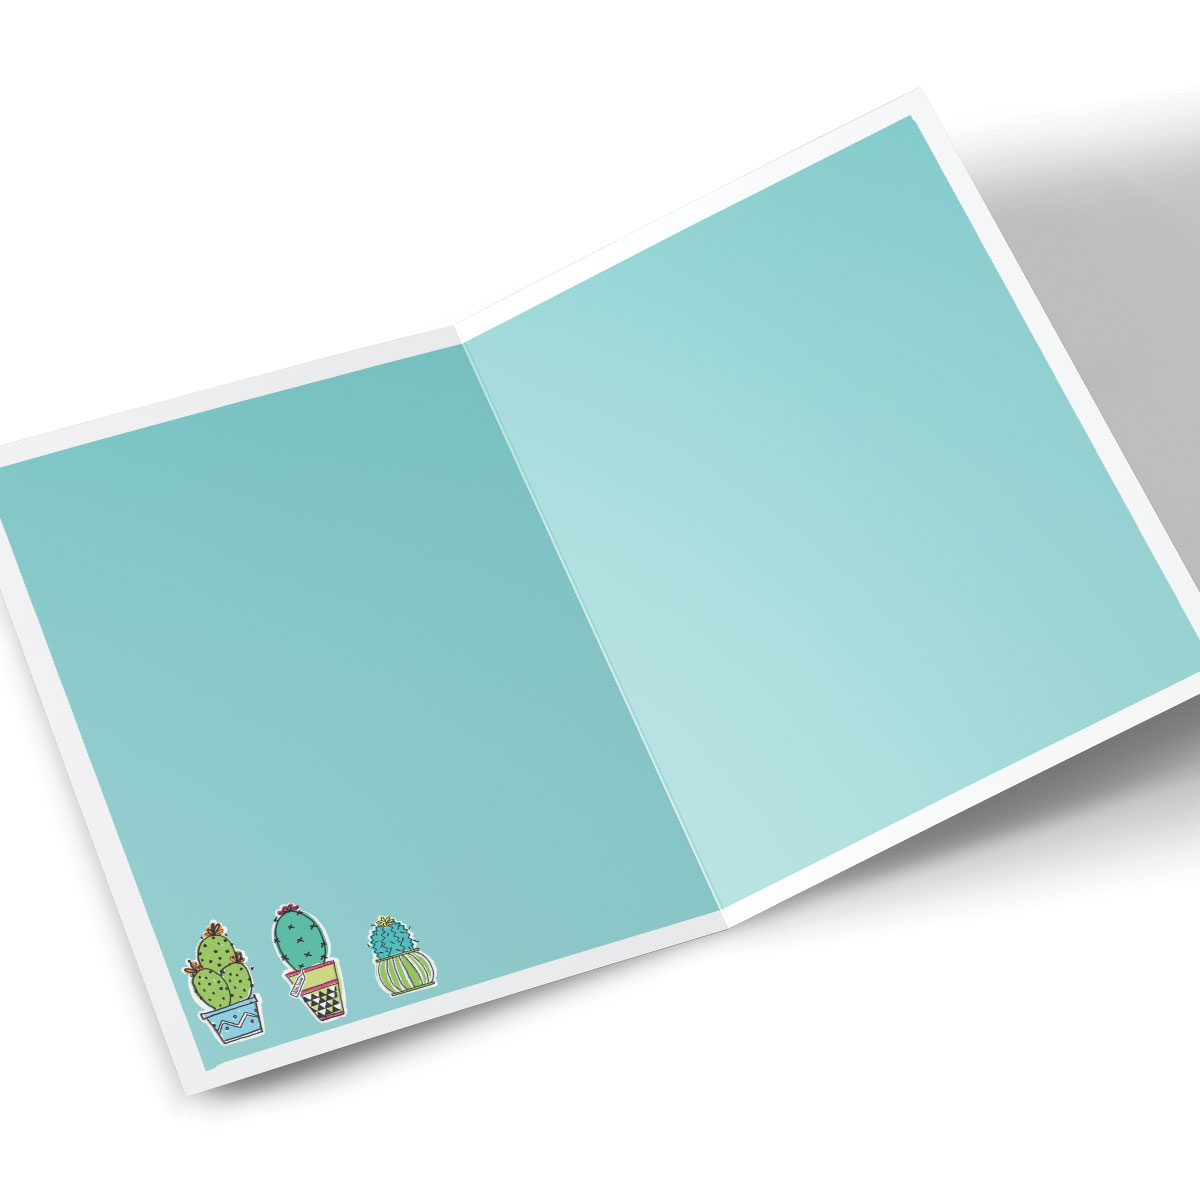 Personalised New Home Card - Three Cactuses